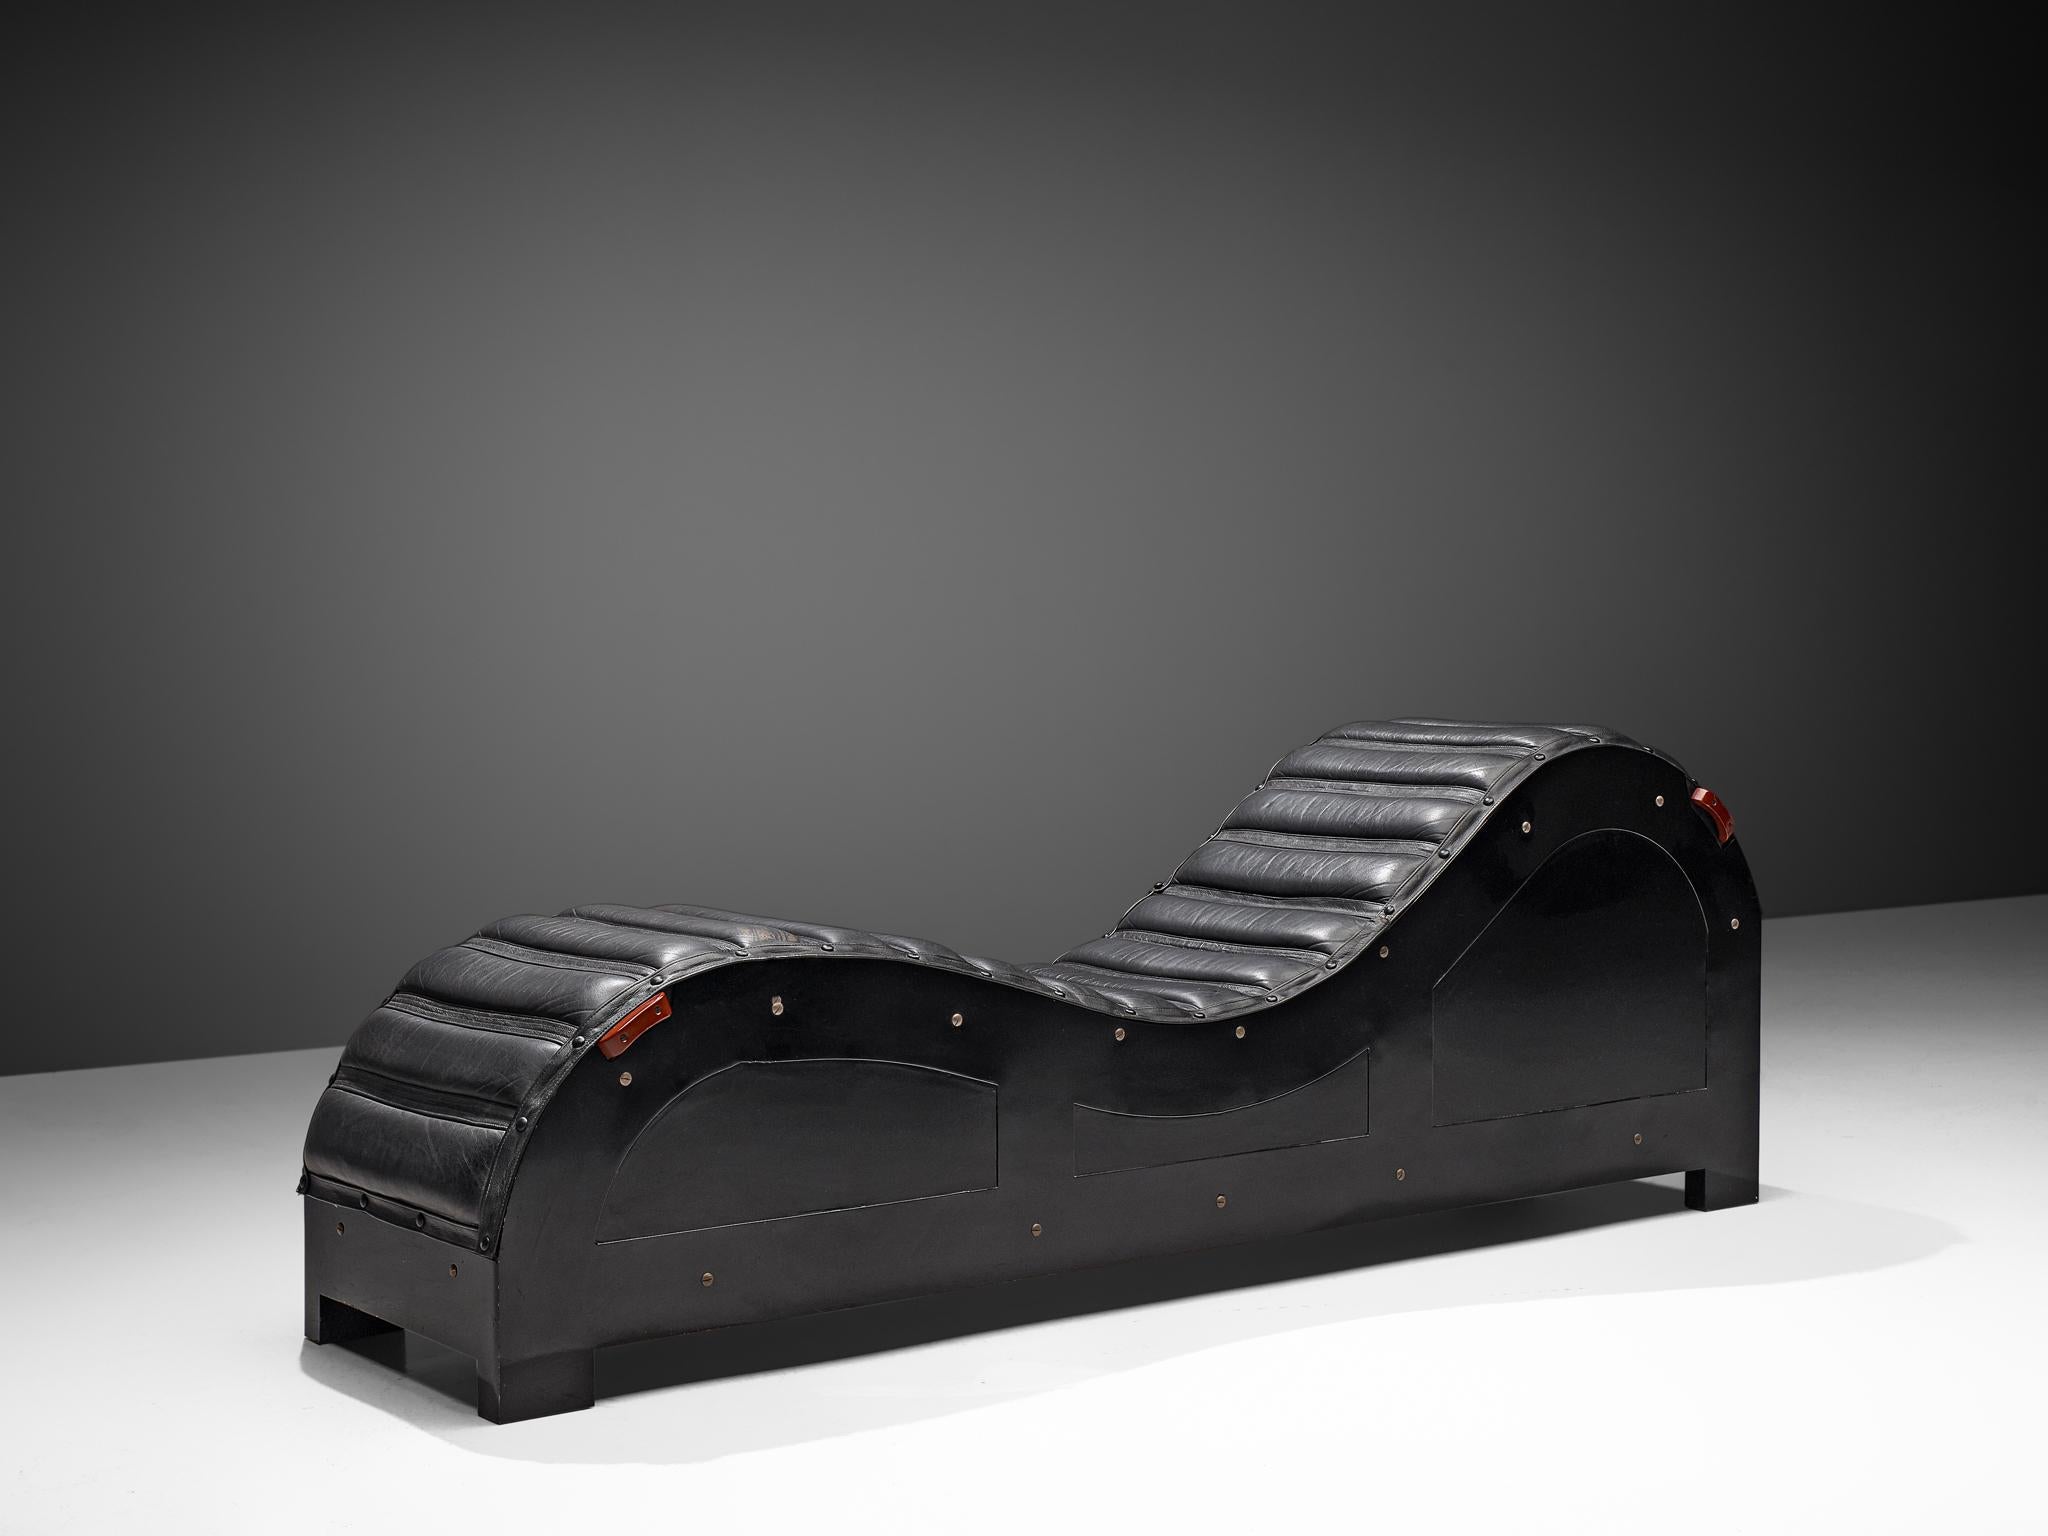 Mats Theselius for Källemo, chaise longue, leather, wood, steel, Sweden, 1992

Limited edition daybed. This chaise longue was designed by Swedish Mats Theselius. It consists of a black base with a steel frame and a black leather seating. This daybed